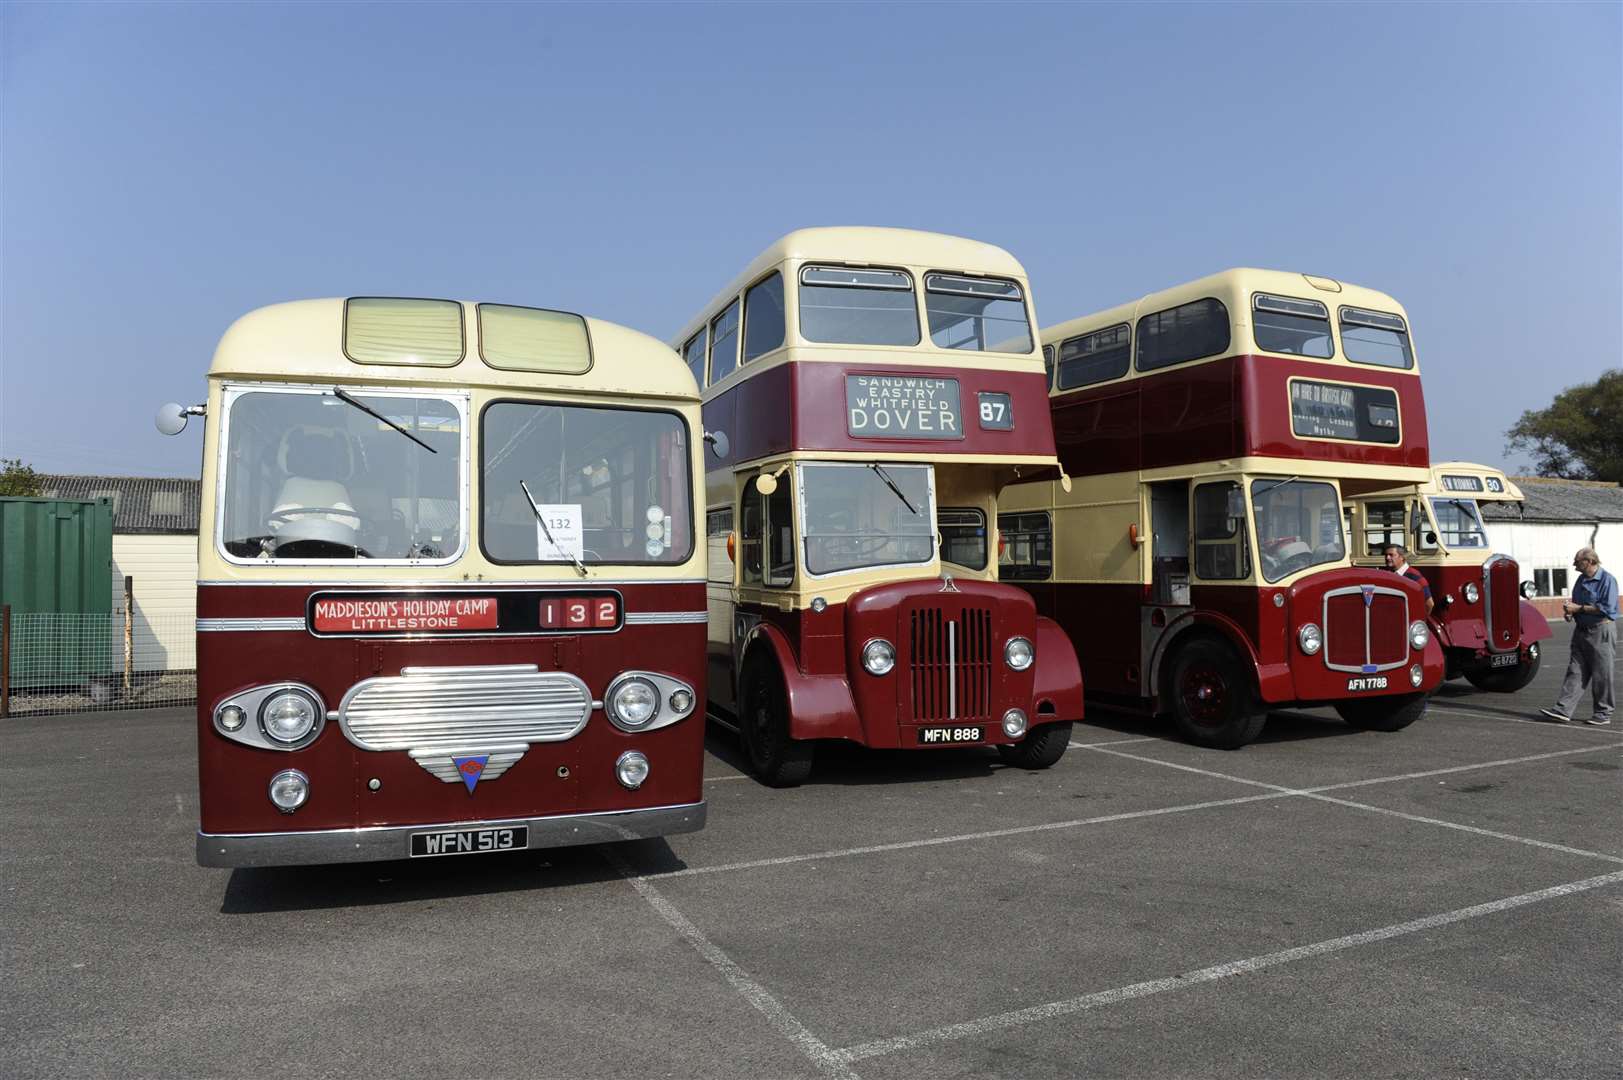 There will be a large collection of buses on display